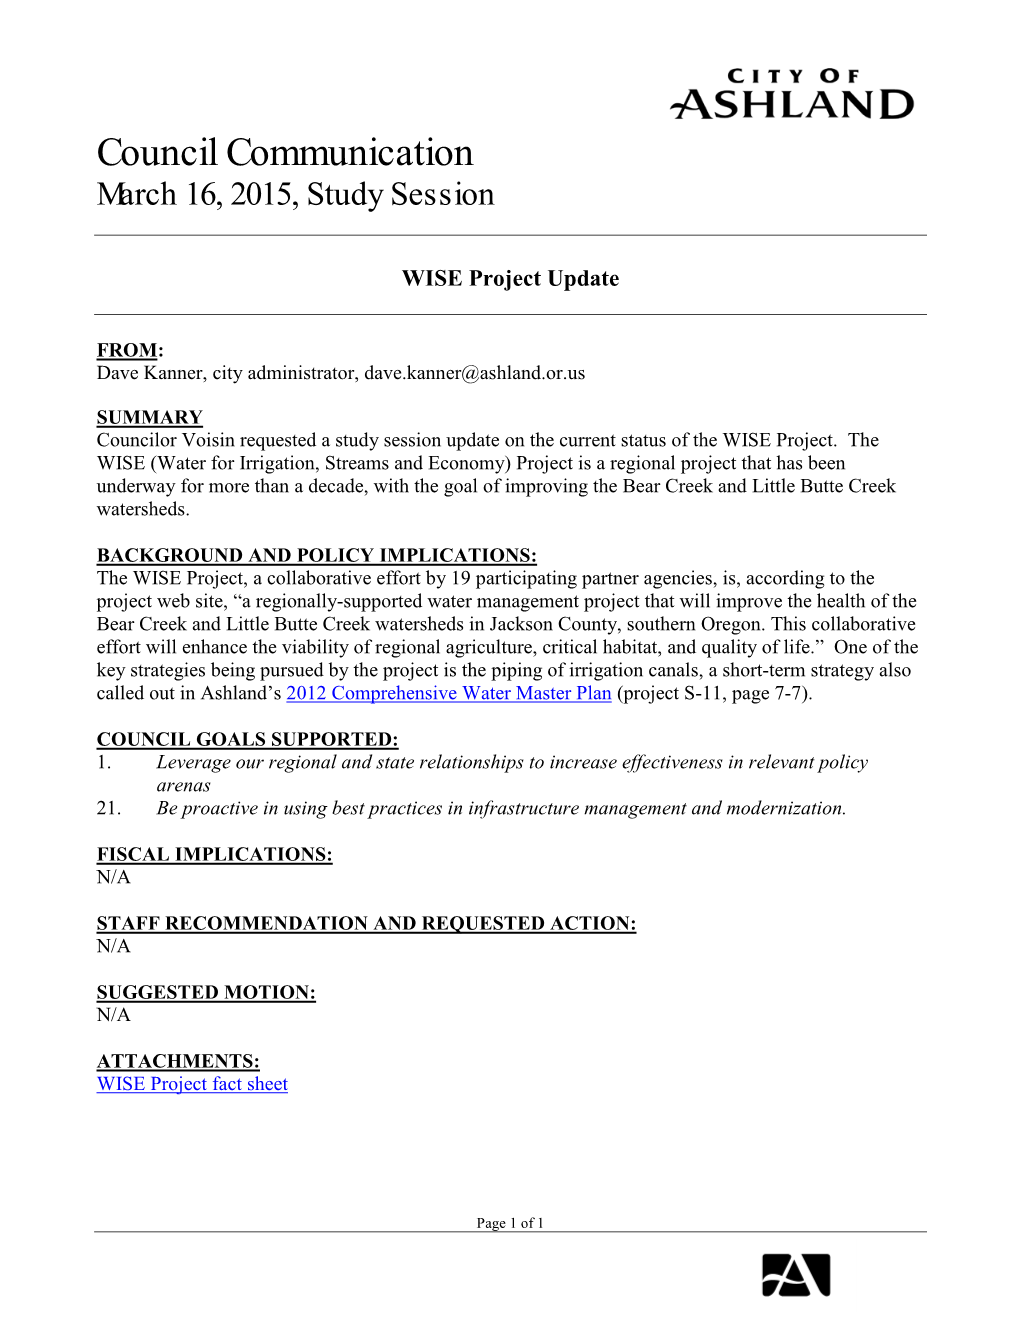 Council Communication March 16, 2015, Study Session